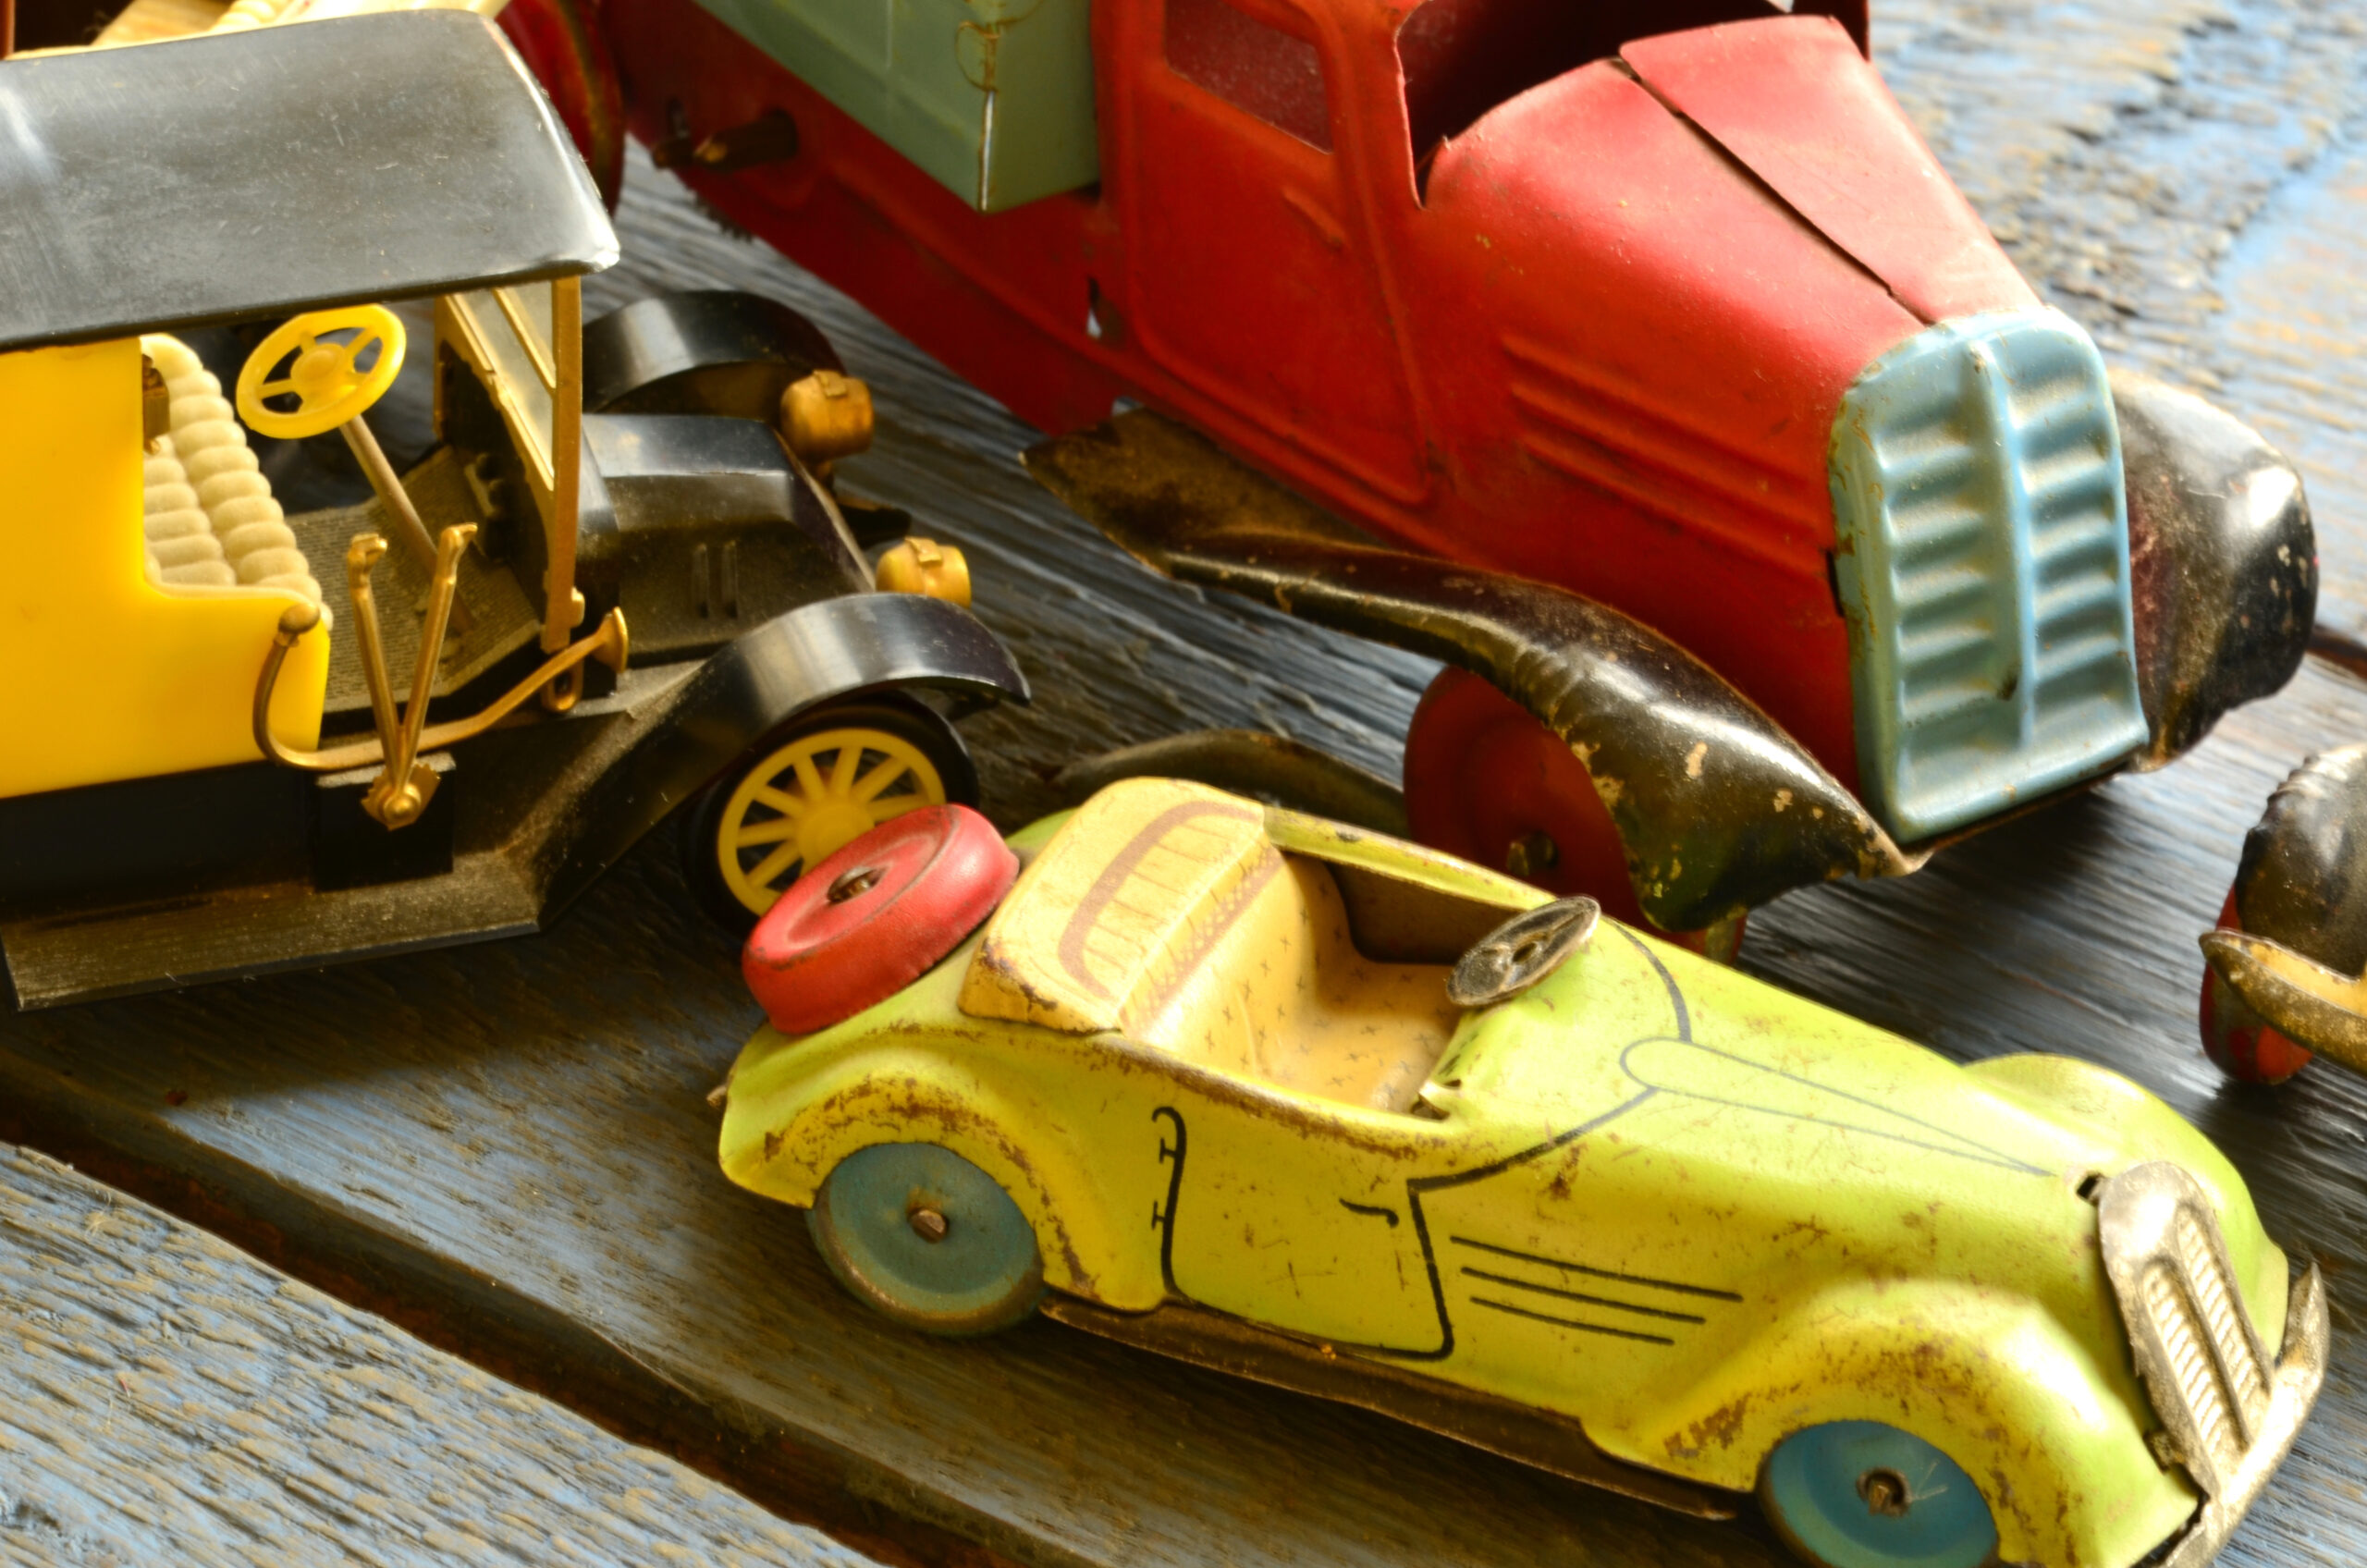 Set of vintage toys - convertible toy car, trucks (lorries) toy, post car toy, yellow car looks similar to a Ford Model T